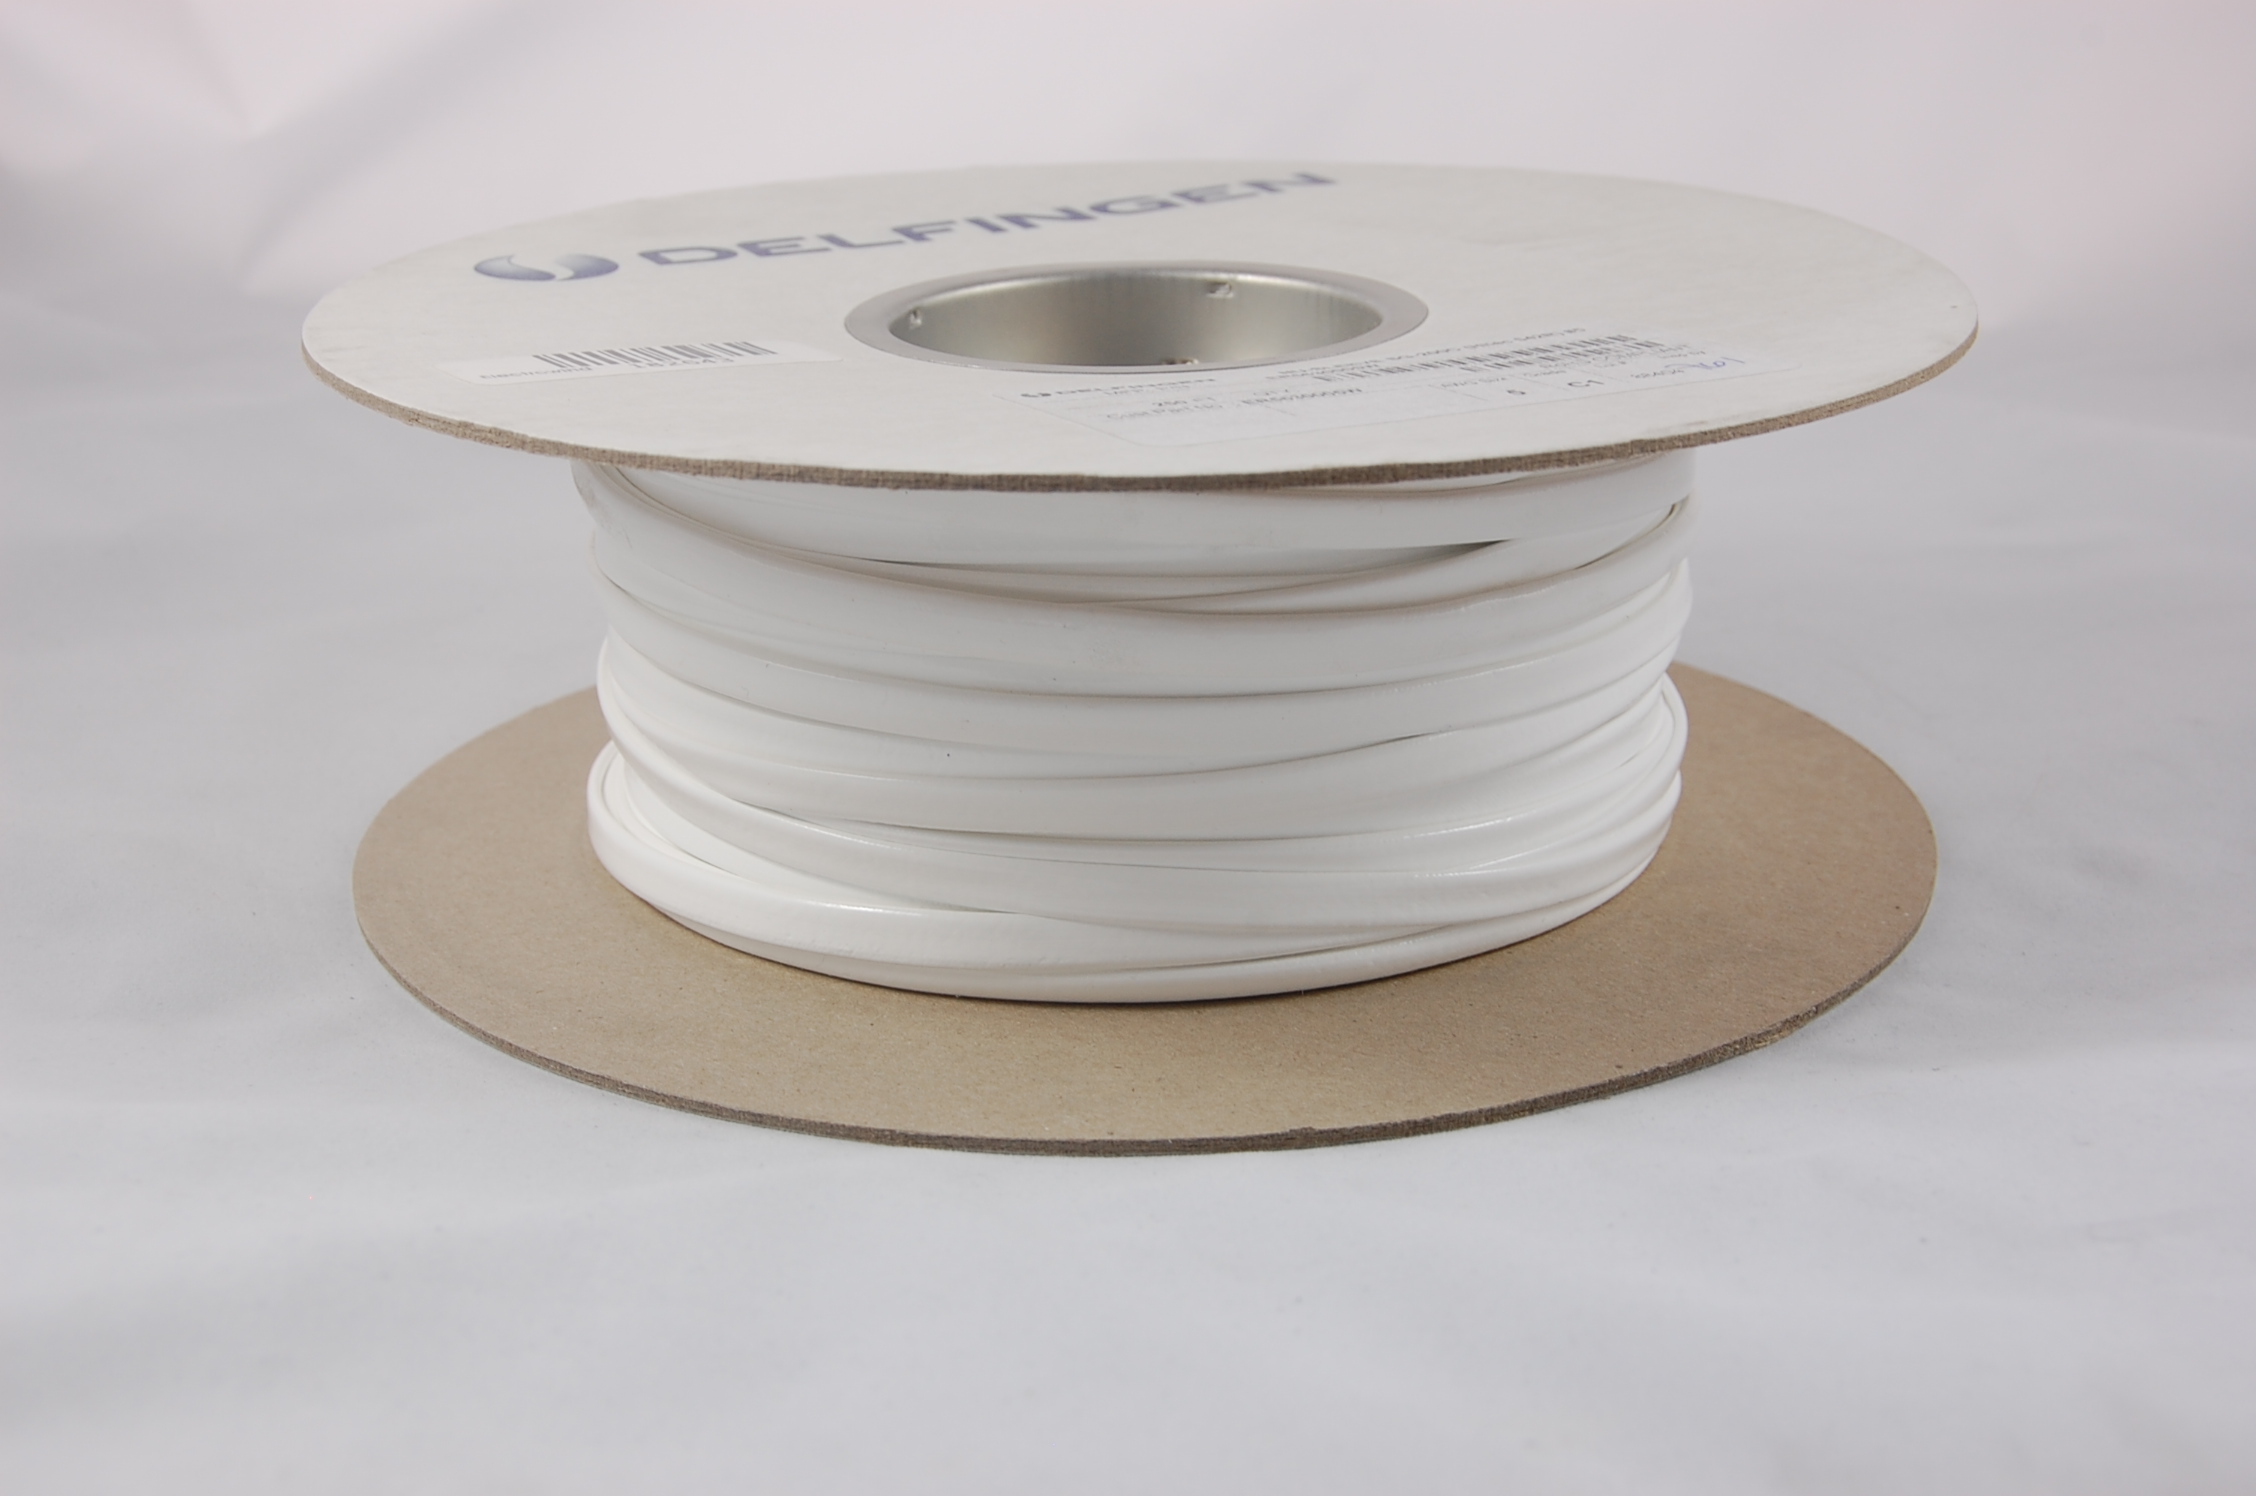 #3 AWG NU-SLEEVE SG-200 C-1 (2500V) Silicone Rubber Coated Braided Fiberglass Sleeving (542F) 200°C, white, 250 FT per spool